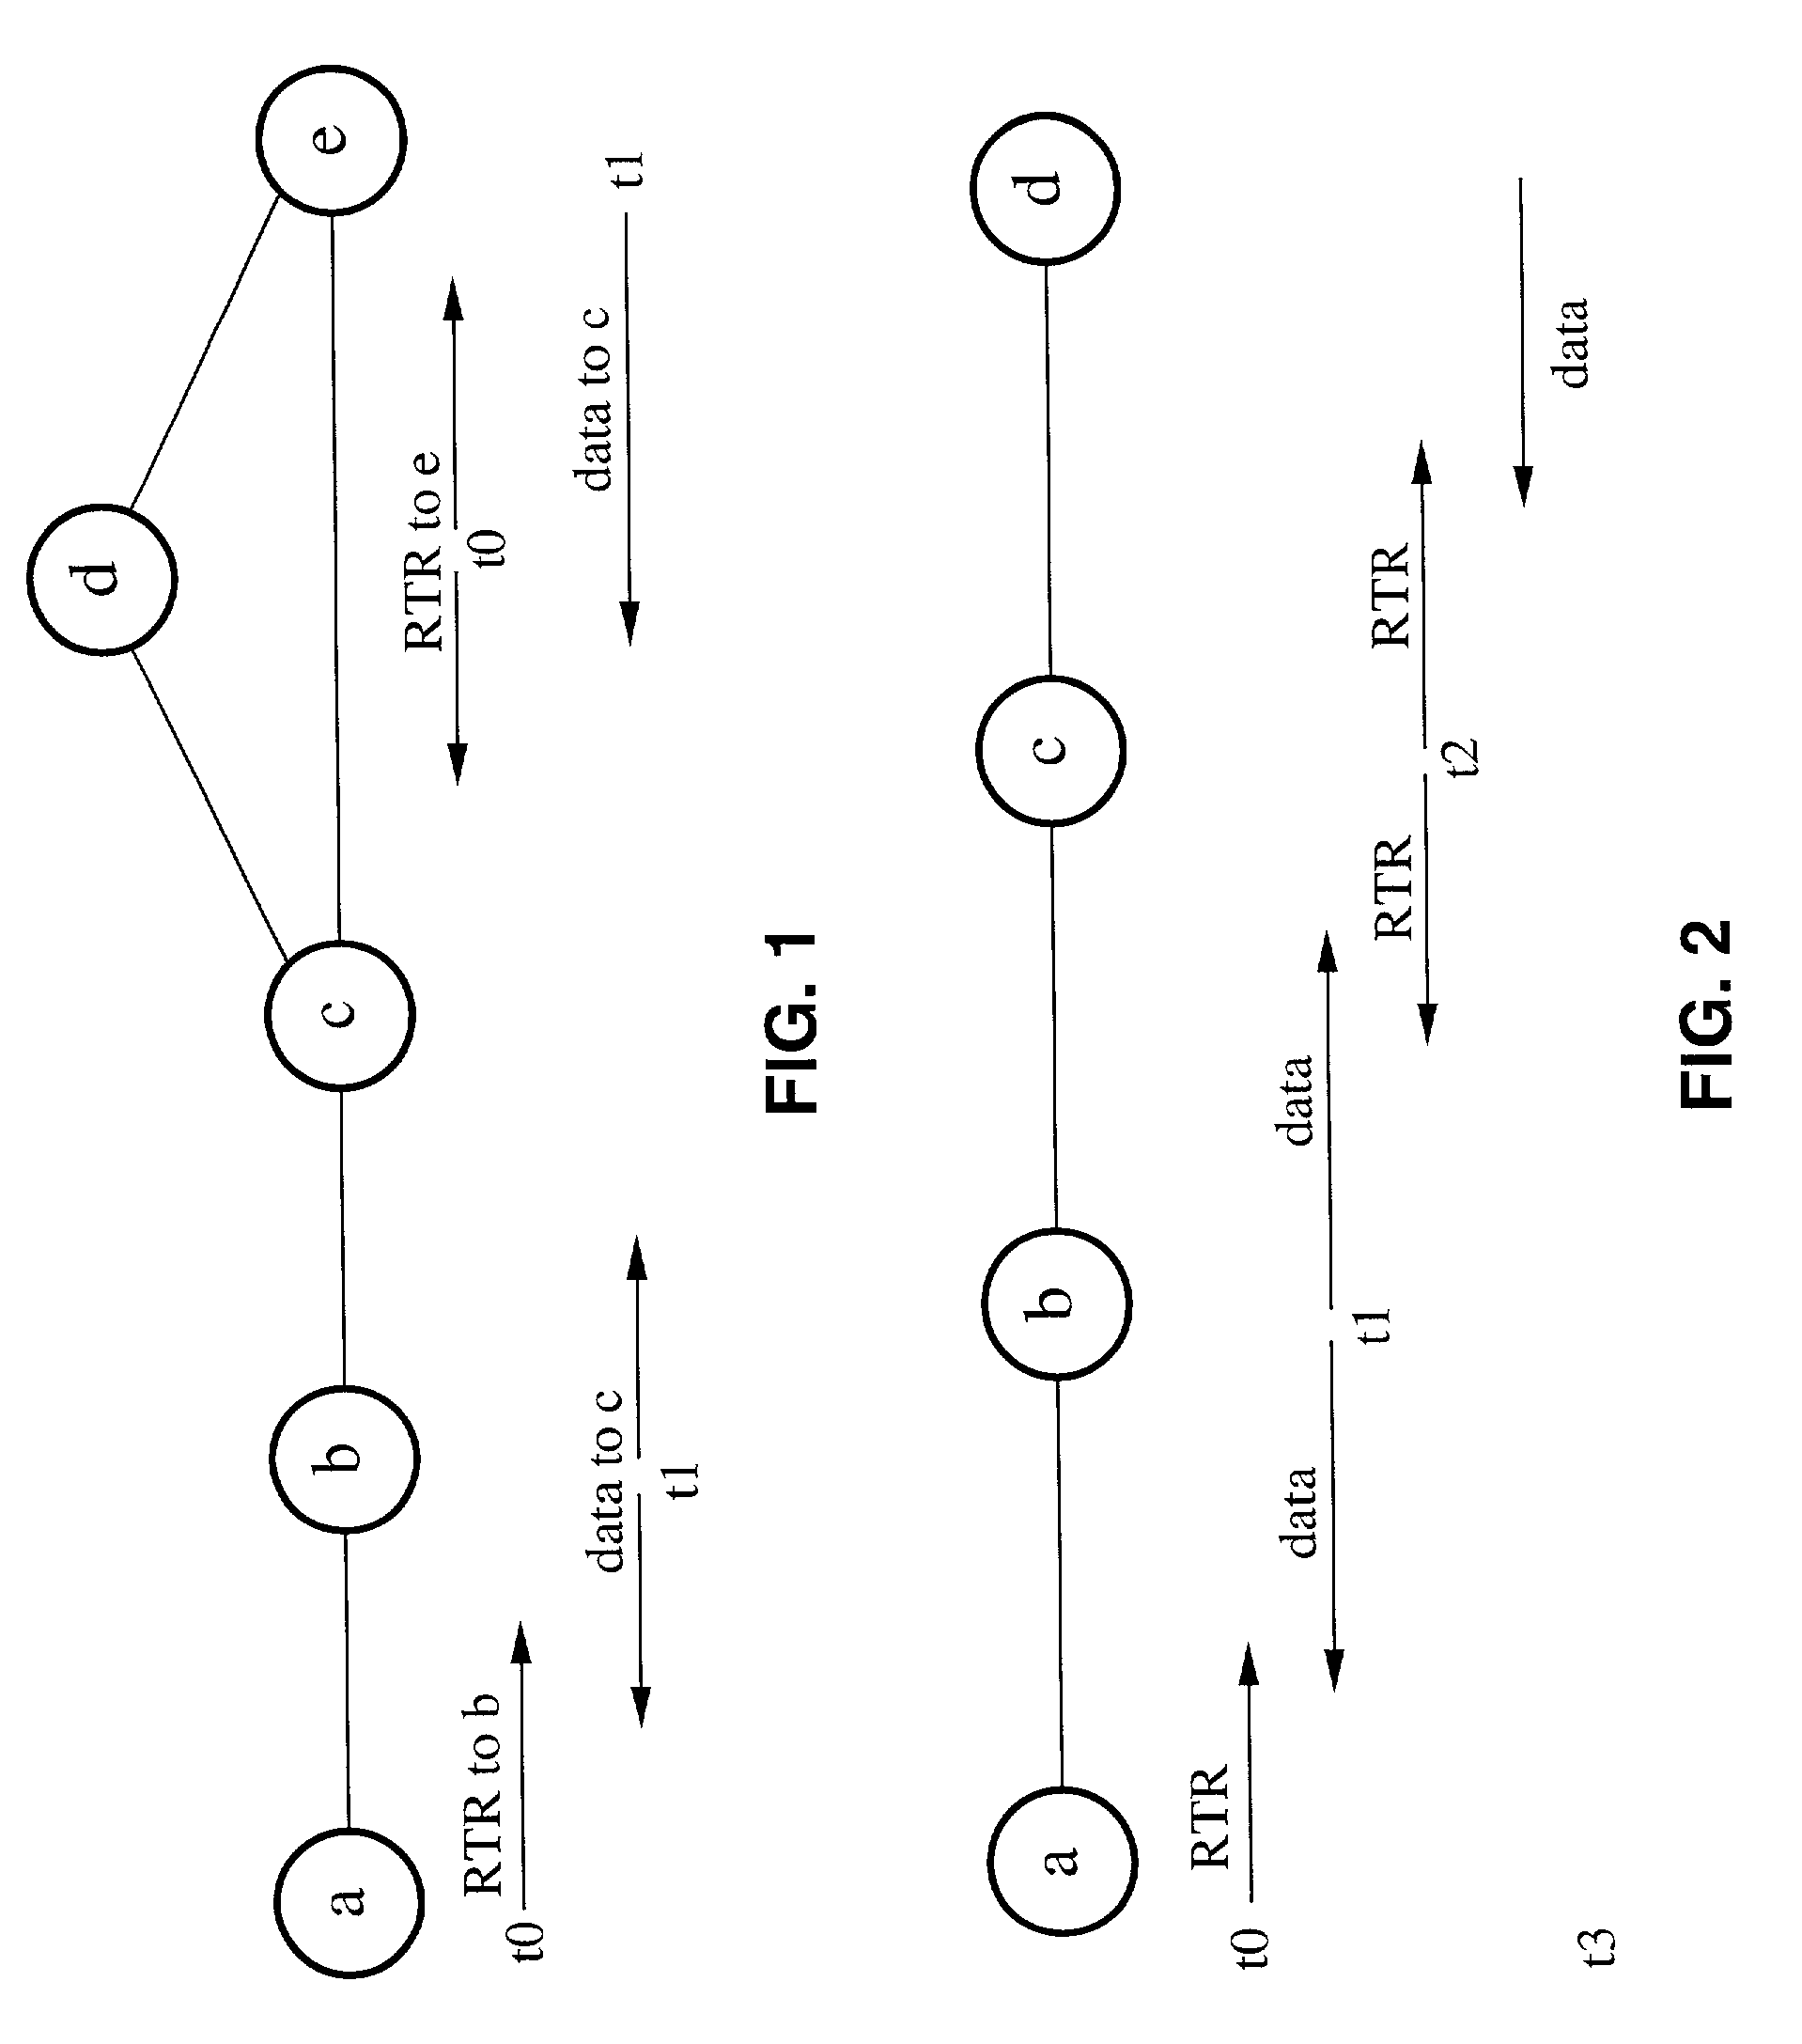 Receiver-initiated multiple access for ad-hoc networks (RIMA)